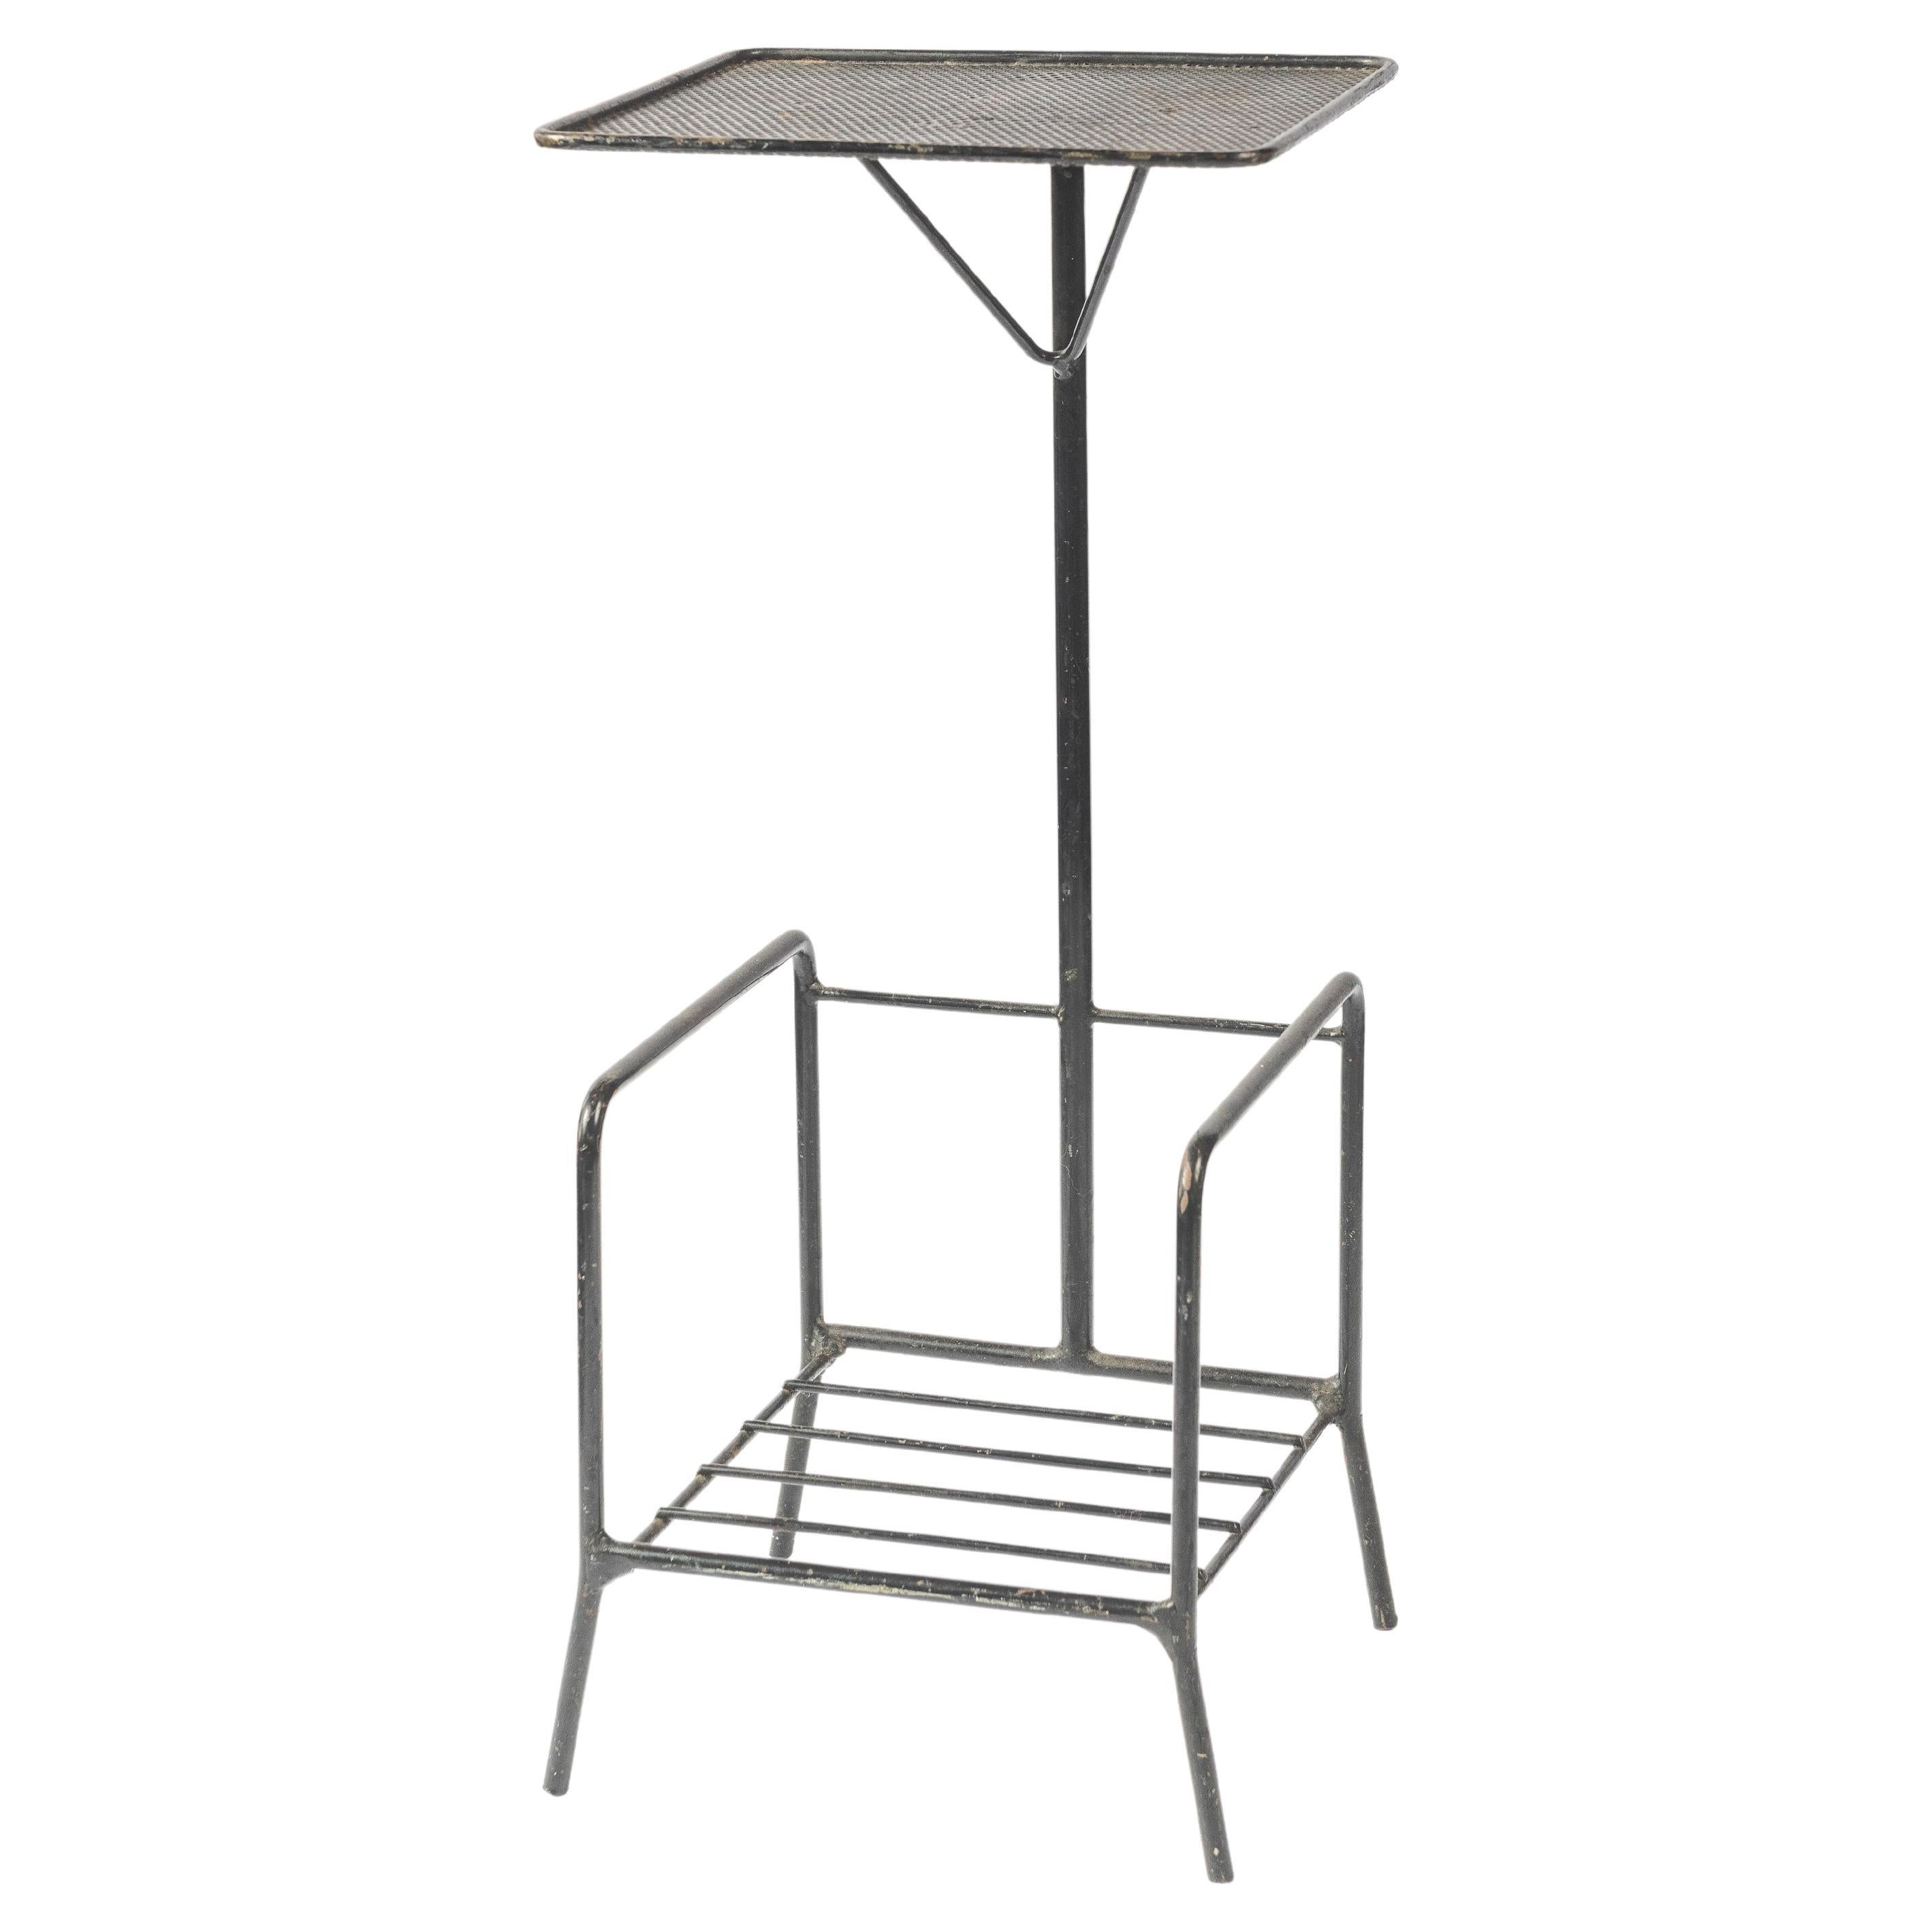 Mid-Century Modern Side or Telephone Table in Perforated Metal with Shelf For Sale